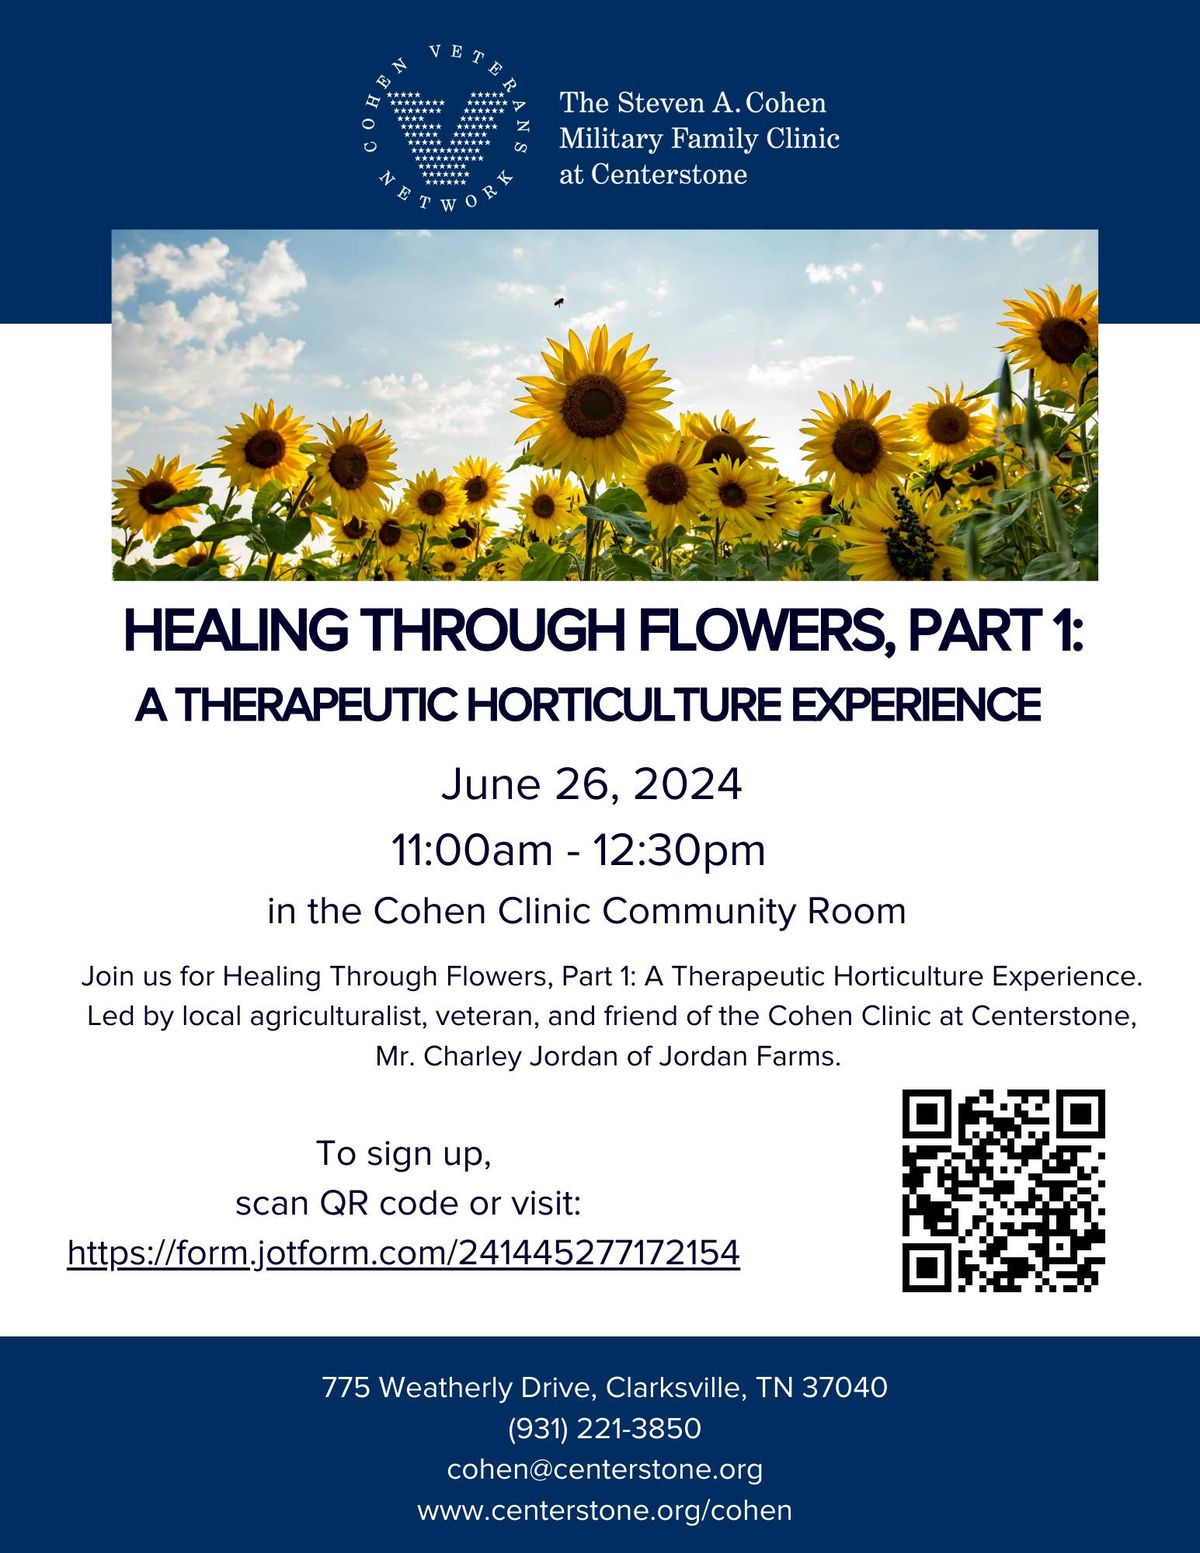 Healing Through Flowers, Part 1: A Therapeutic Horticulture Experience